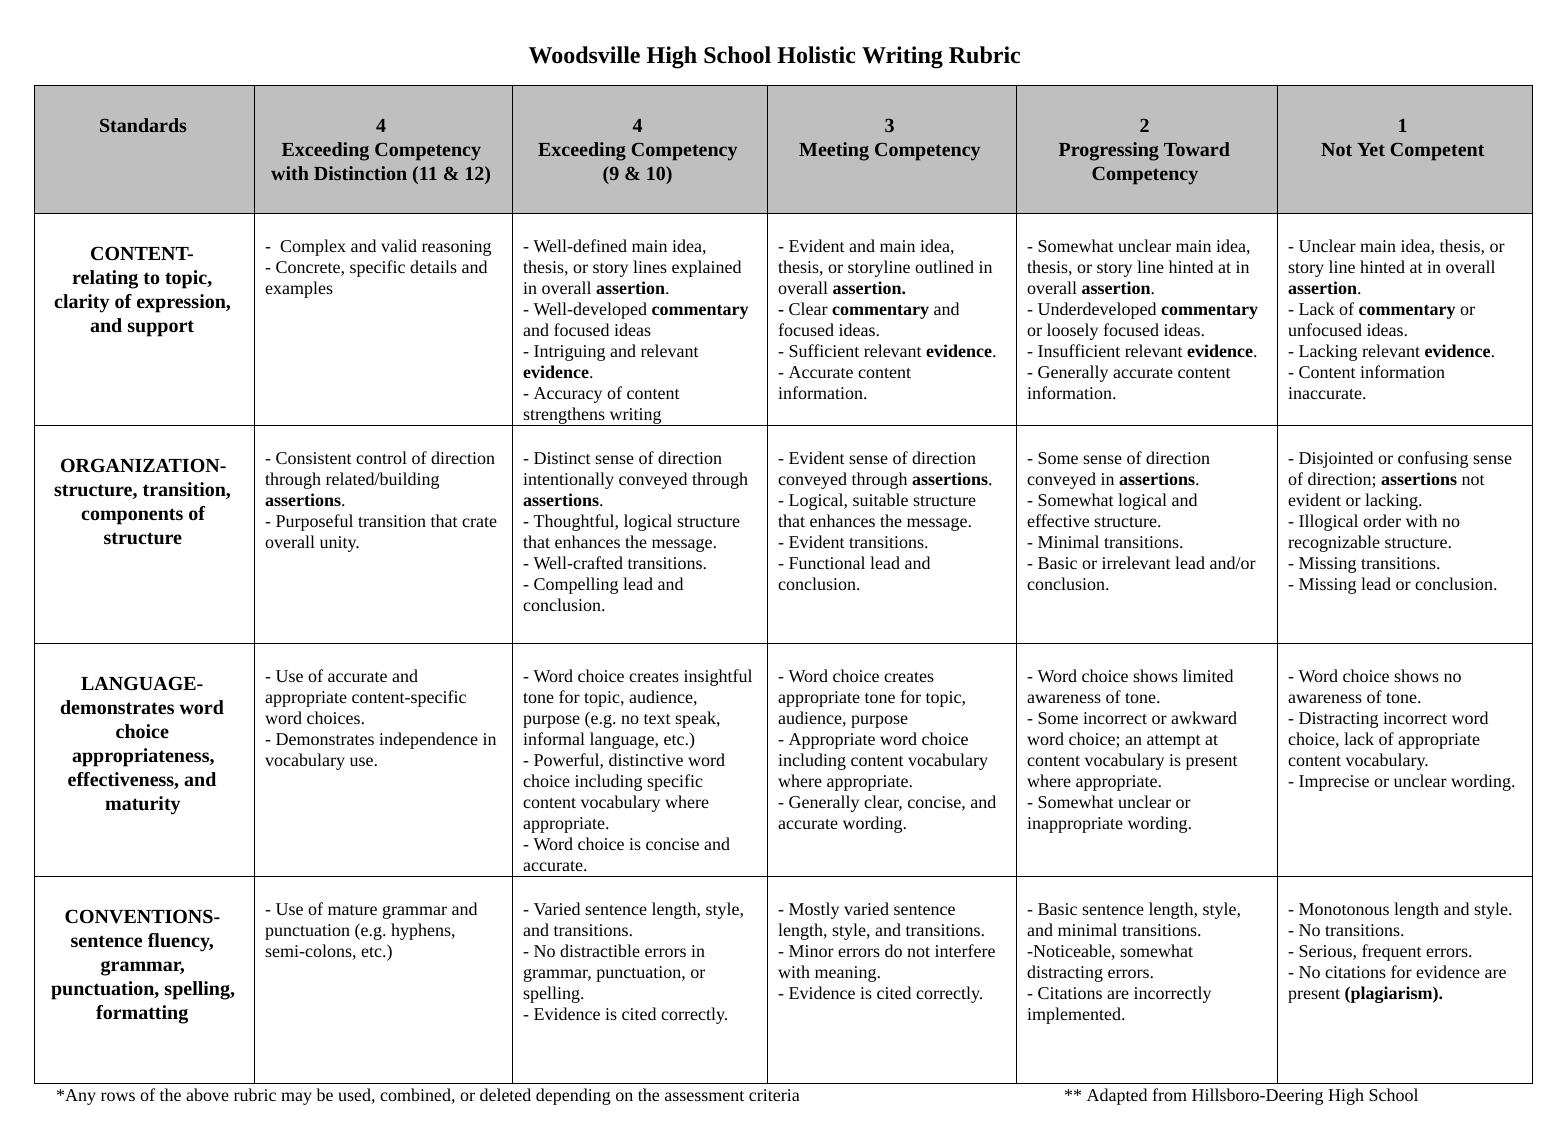 sample of holistic rubric for essay